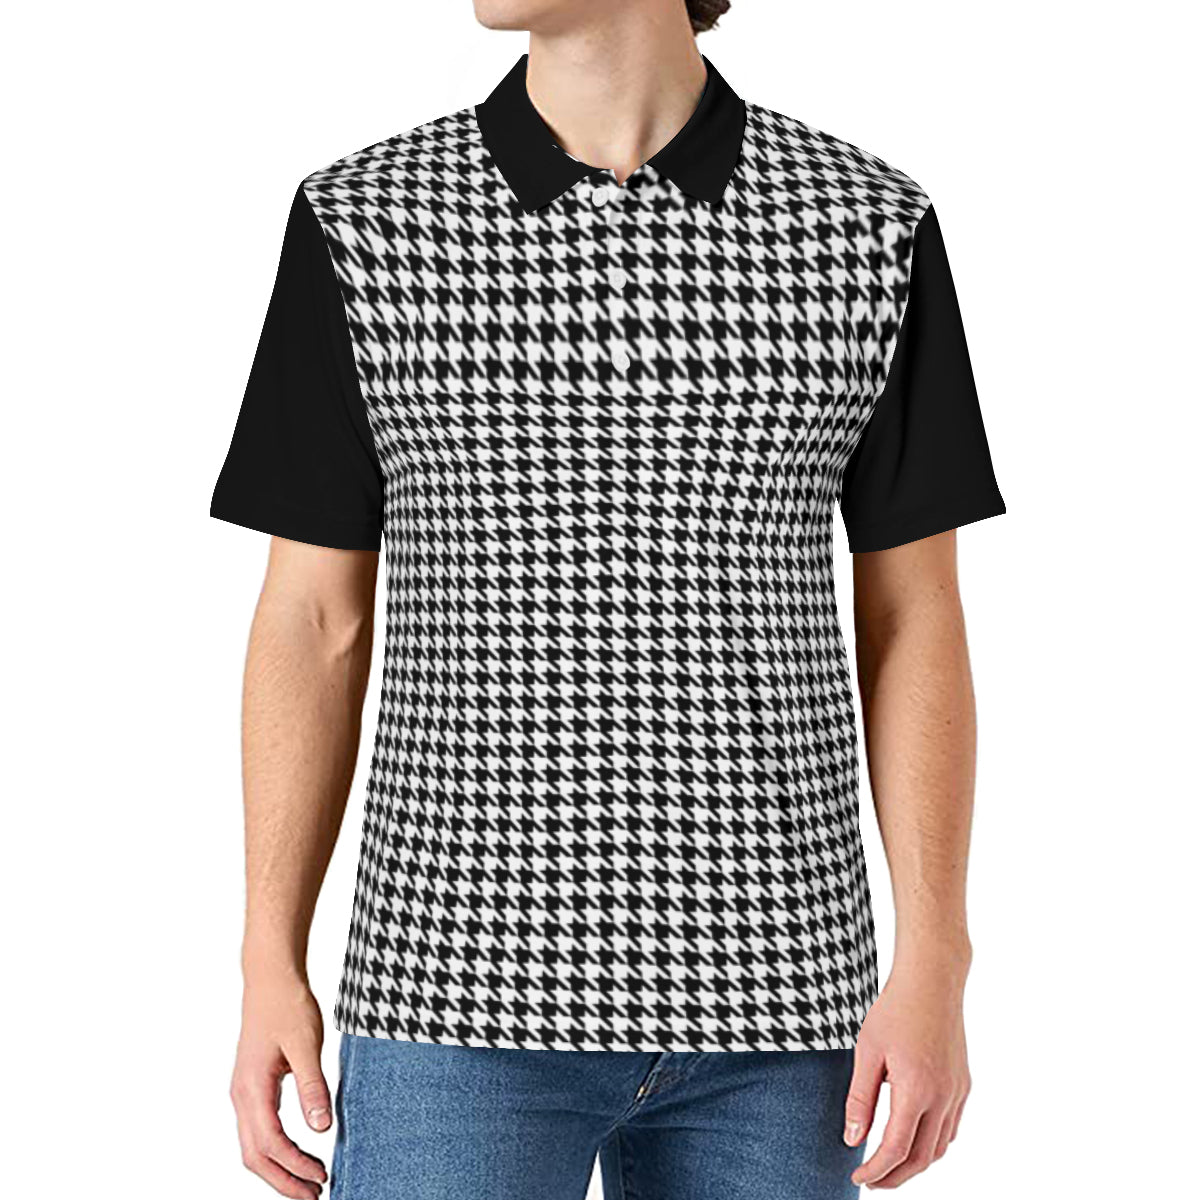 Houndstooth Shirt Men, Black Houndstooth Polo Shirt Men, Retro Polo Shirt, Vintage Style Polo Shirt, 60s Shirt Style, 60s Top Men